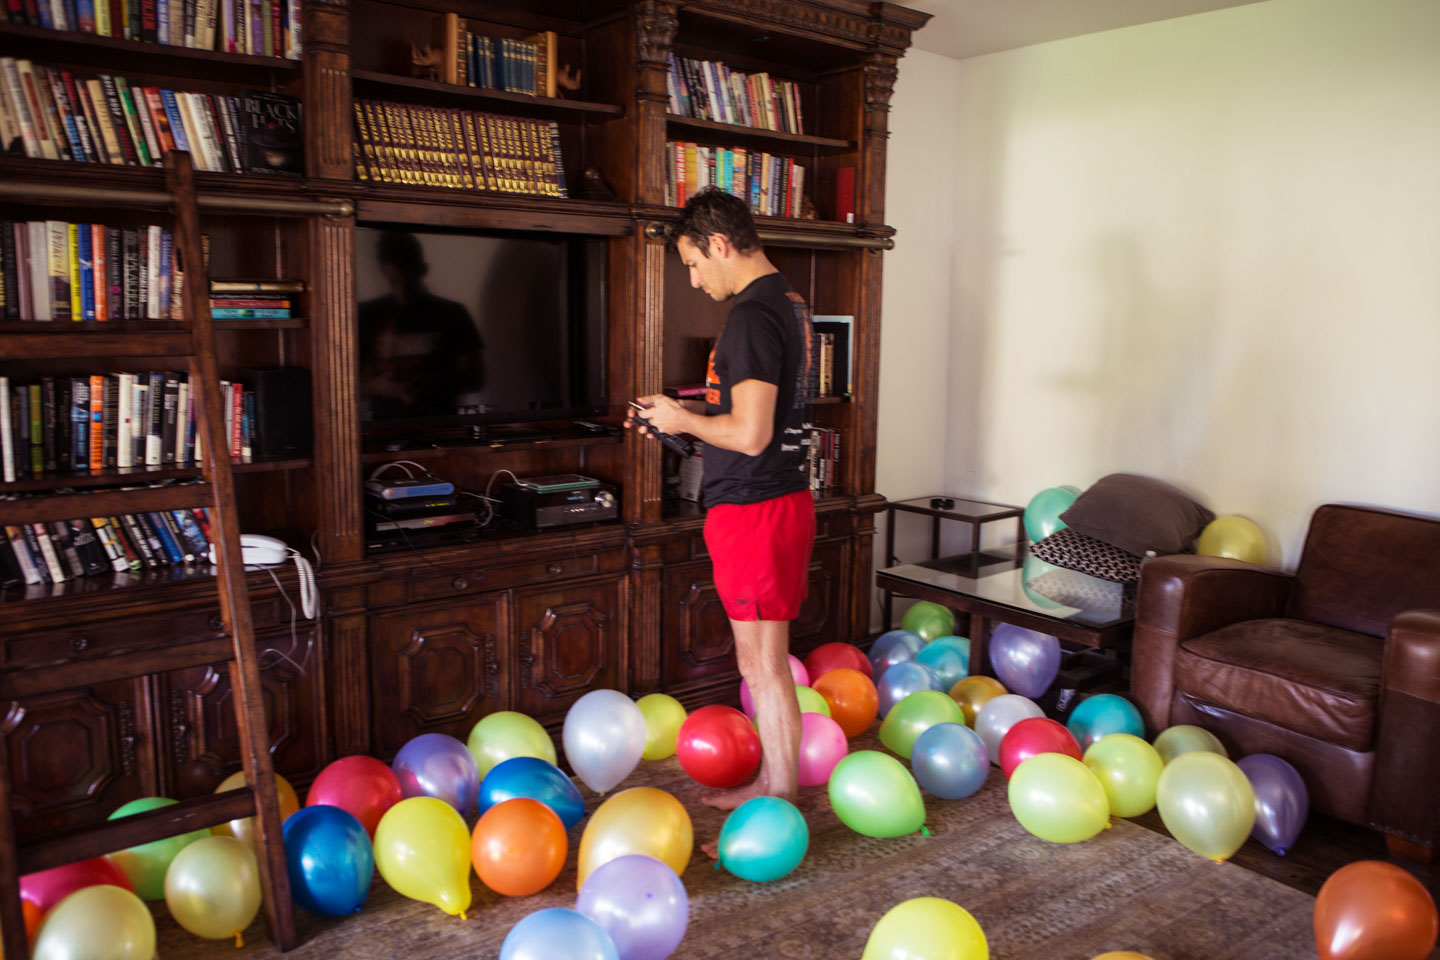 Lost in Balloons